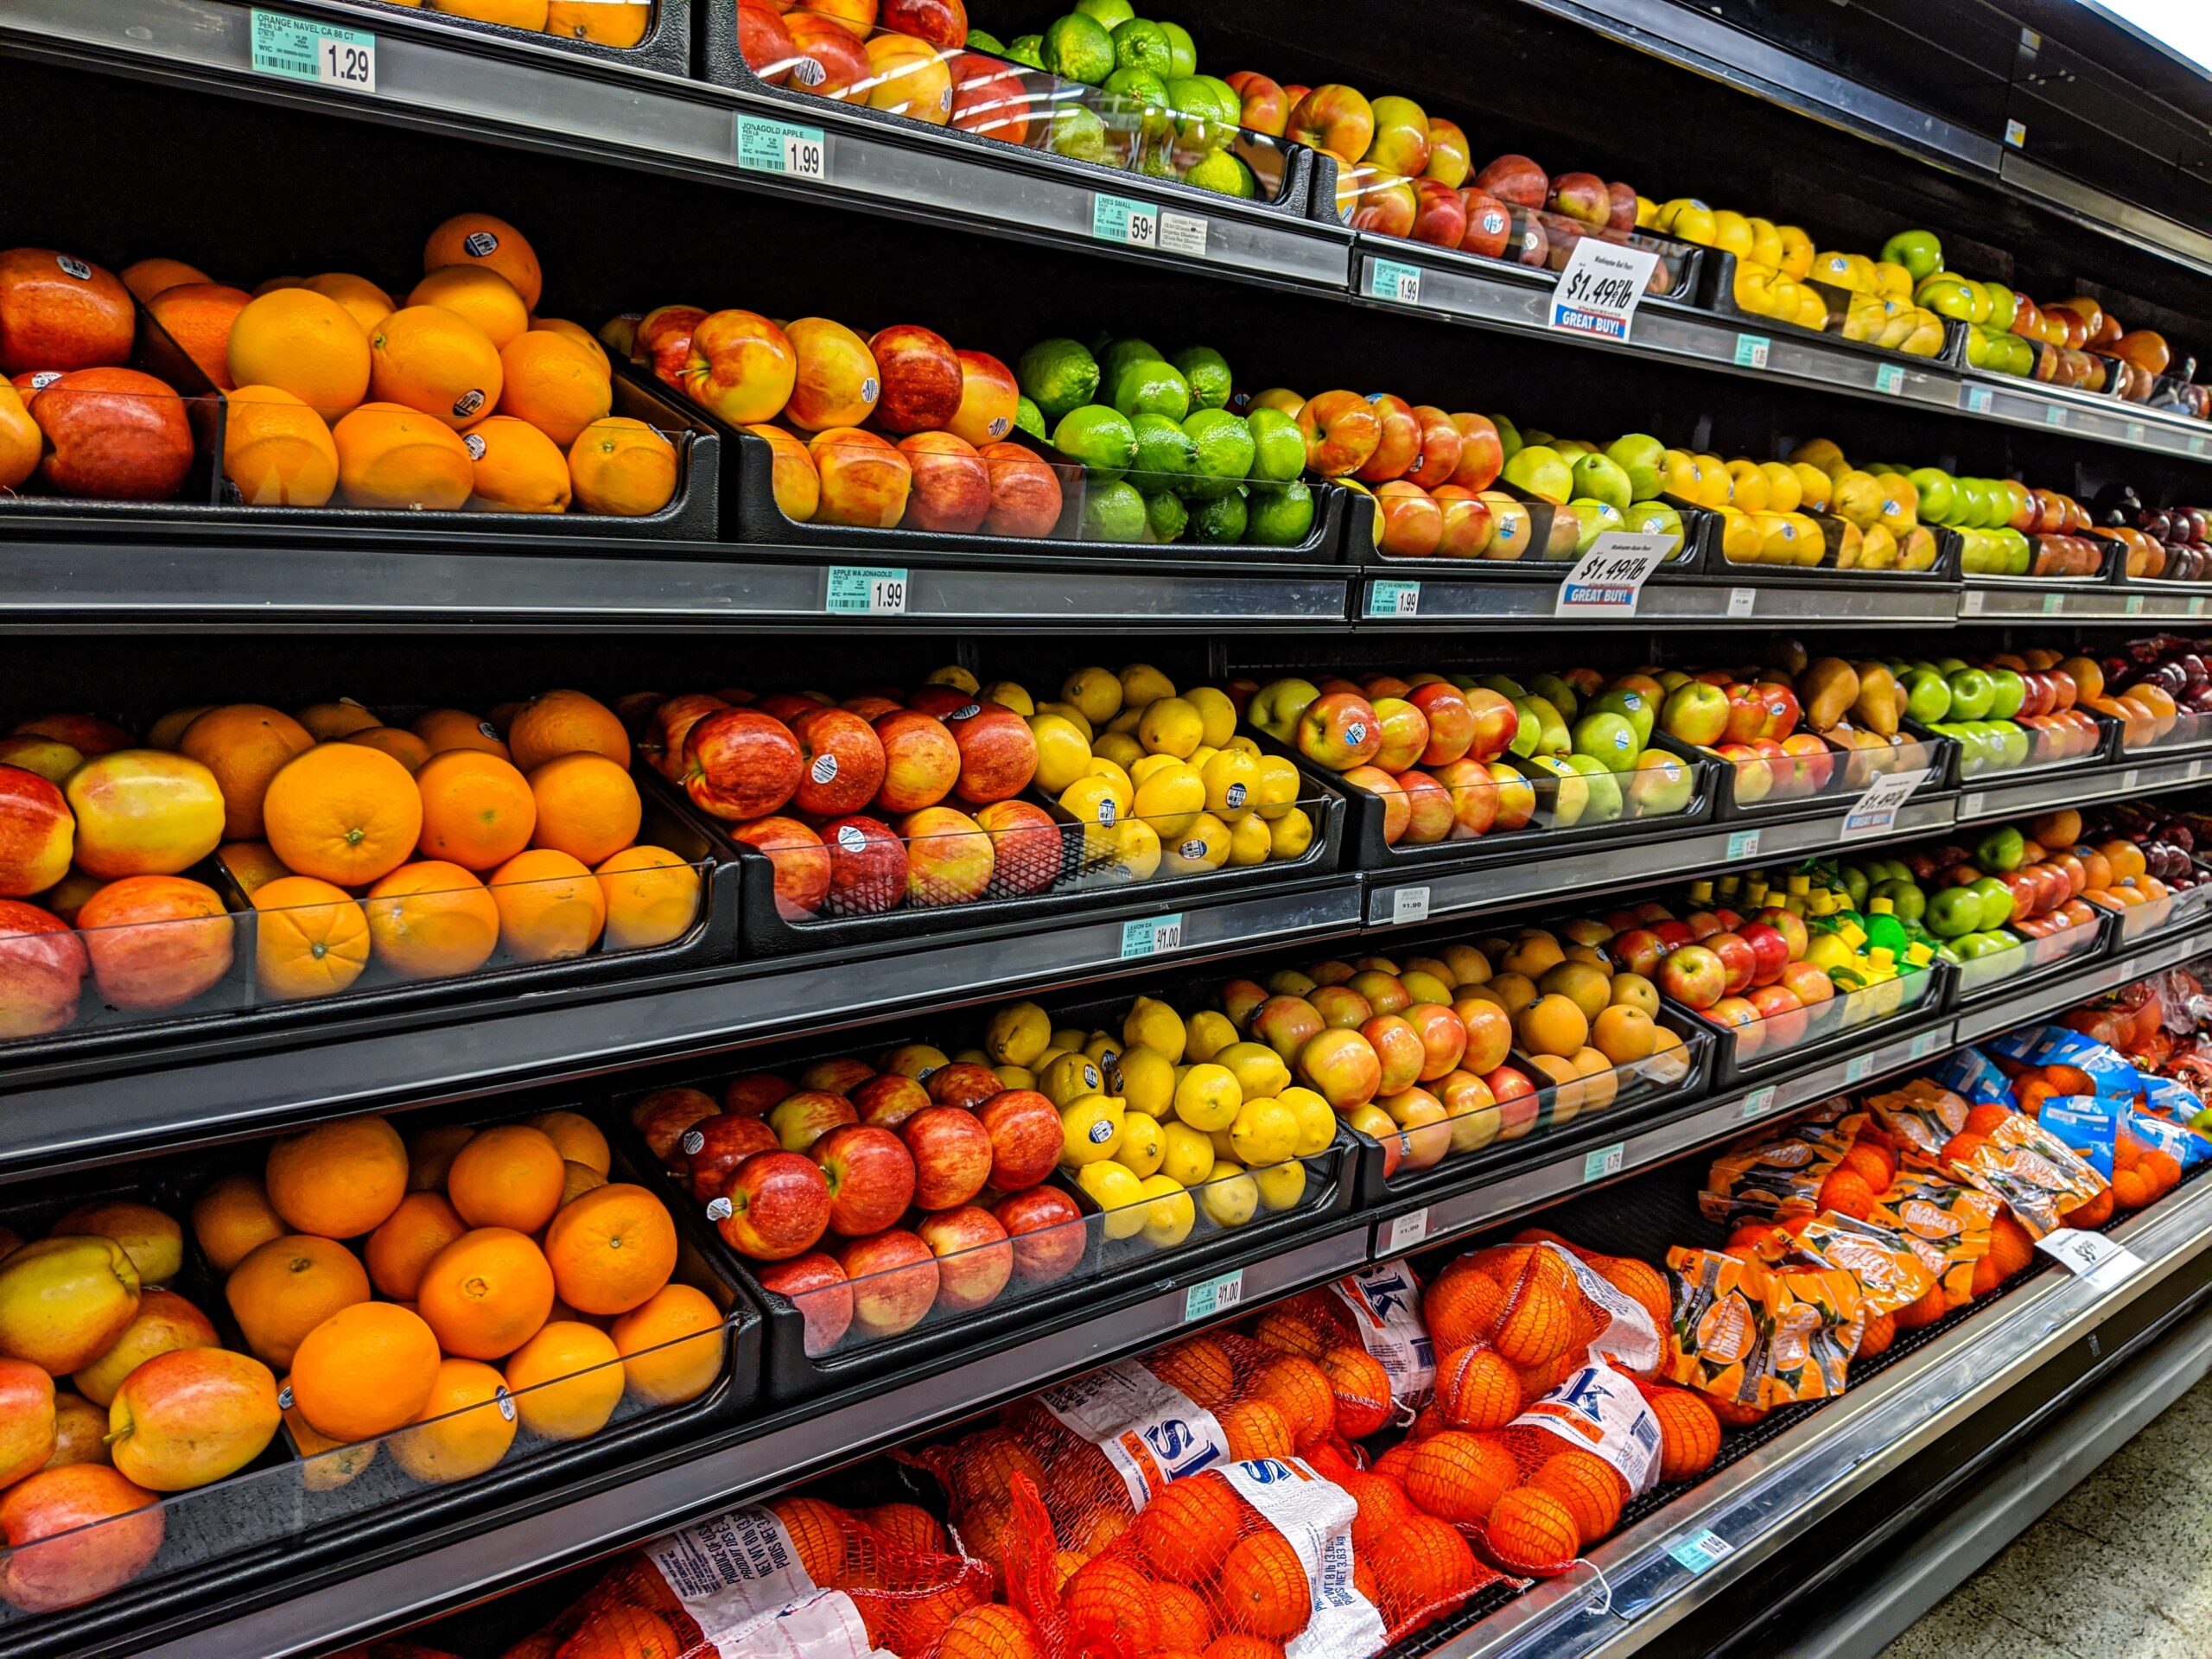 A supermarket aisle filled with fruits and vegetables.